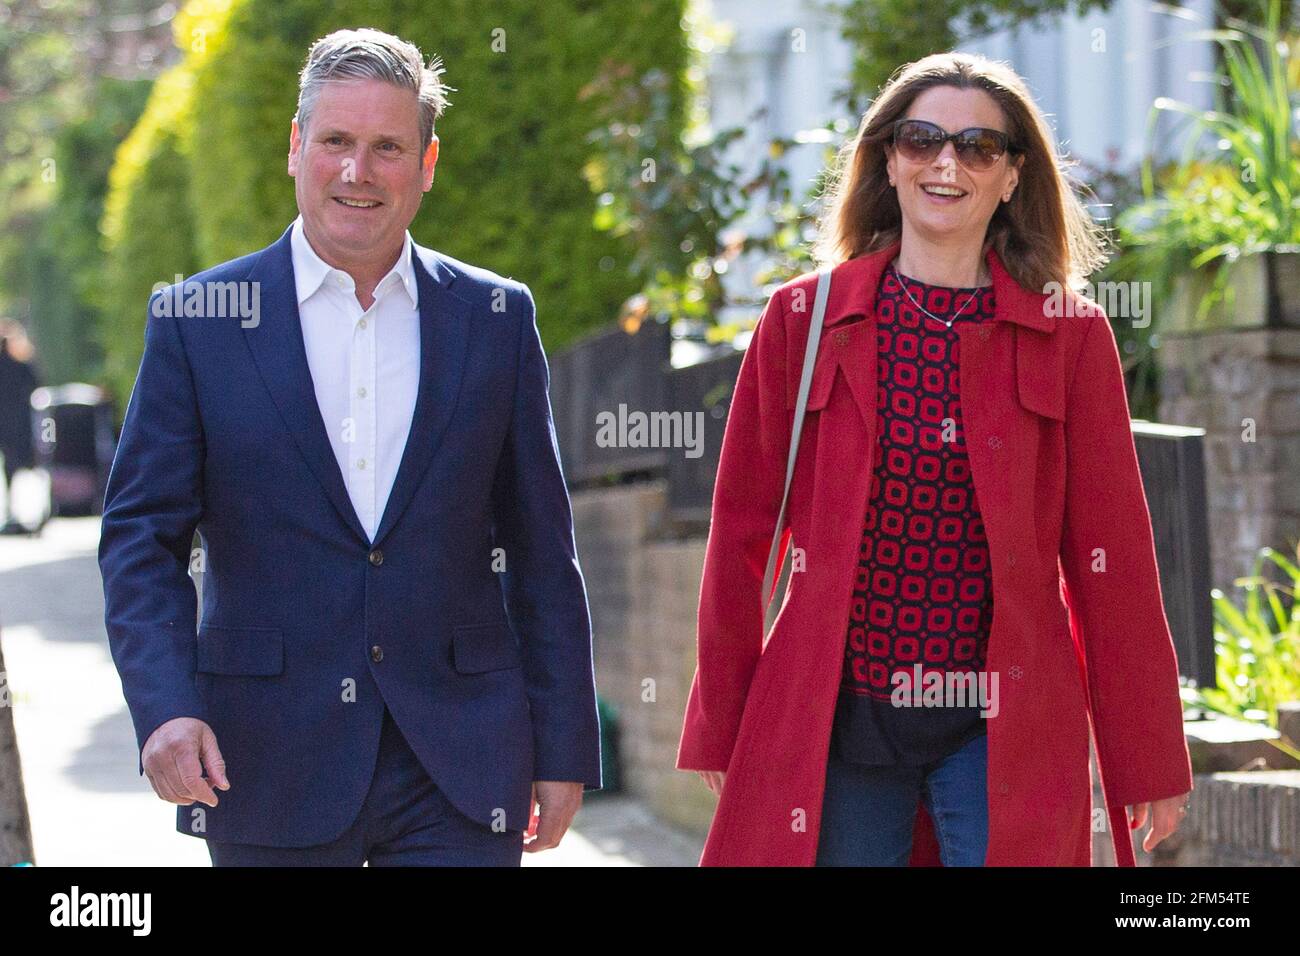 Labour Leader Sir Keir Starmer and wife Victoria leave walk to their local Polling Station on the 6th of May 2021, in North London, UK Stock Photo